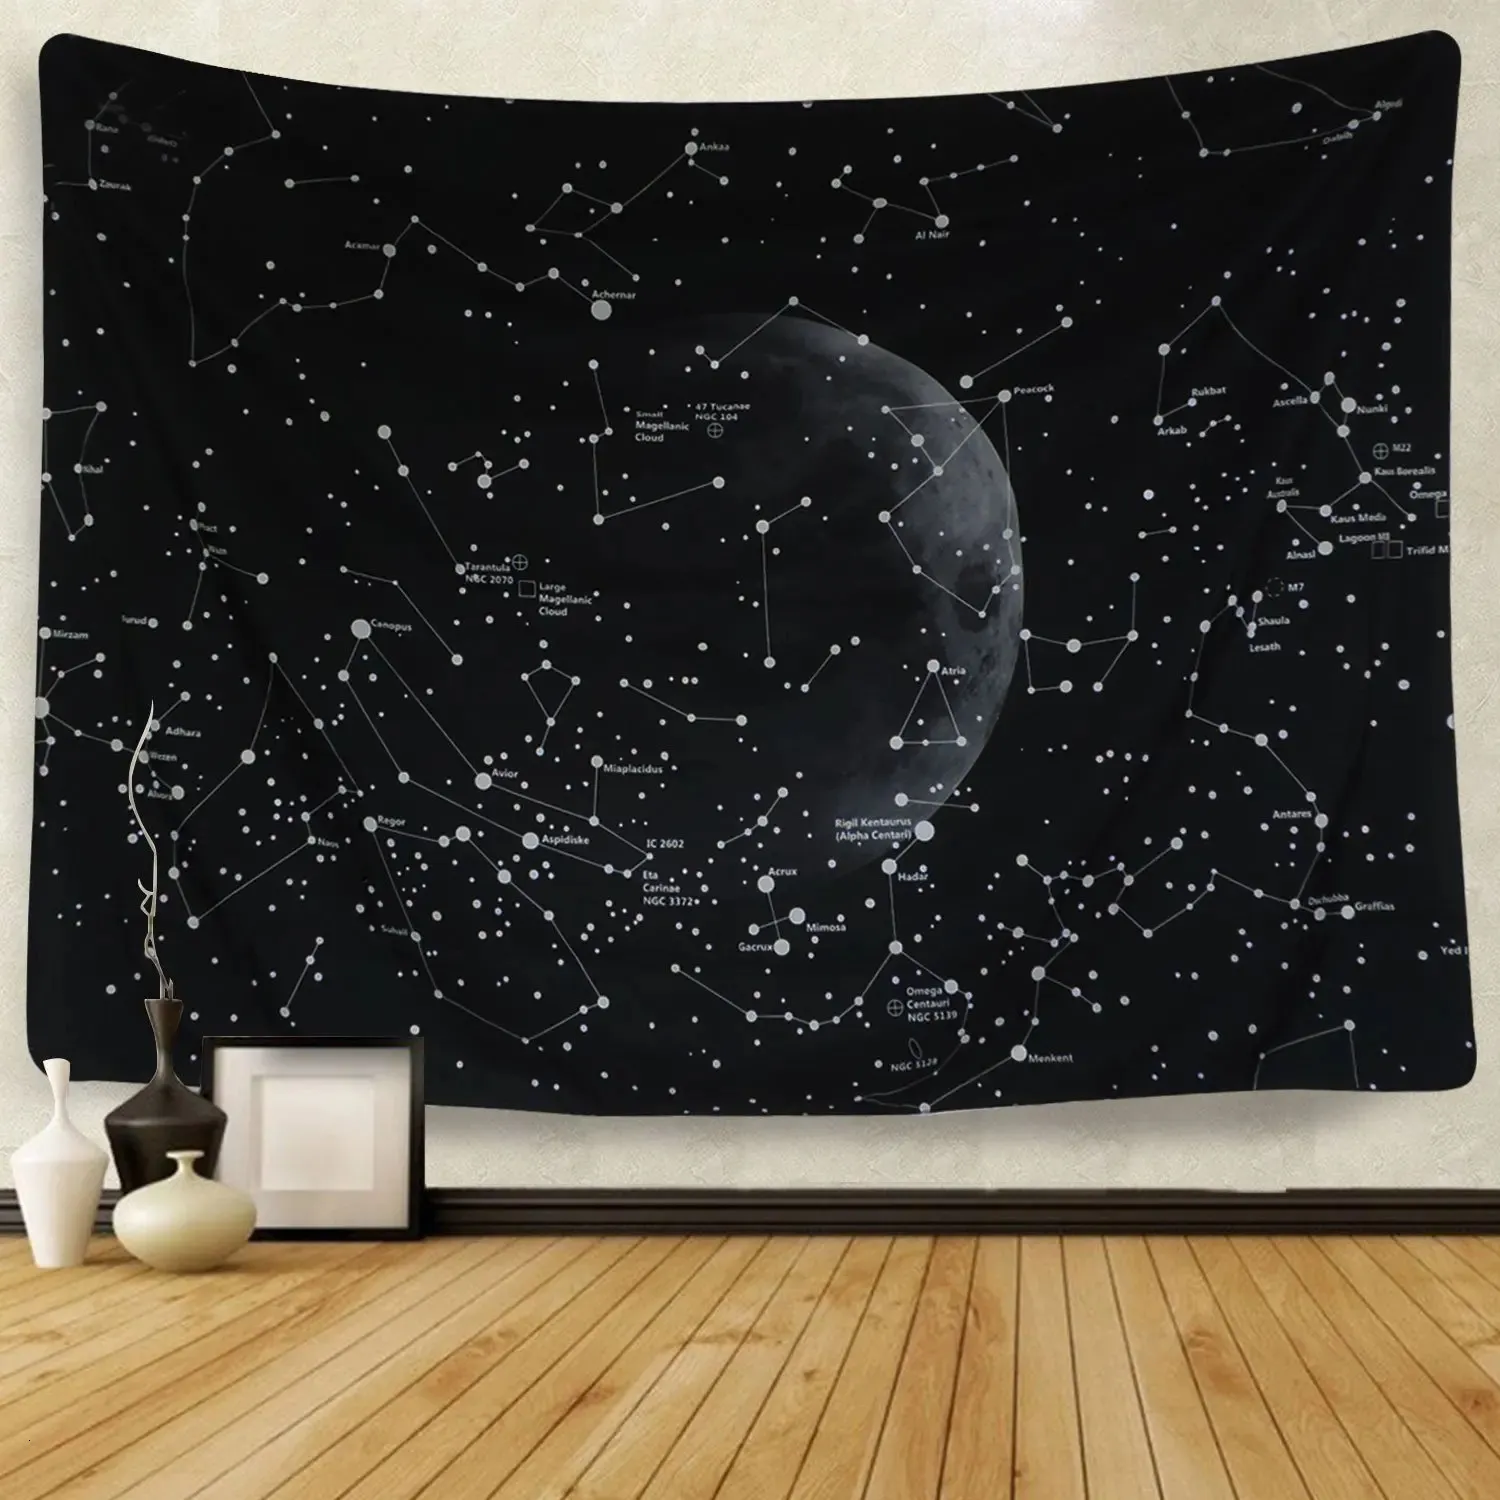 Moon Stars Constellations Tapestry Wall Tapestry Zodiac Galaxy Space Tapestry Bohemian Wall Hanging Art Tapestries Wall Filt 240304